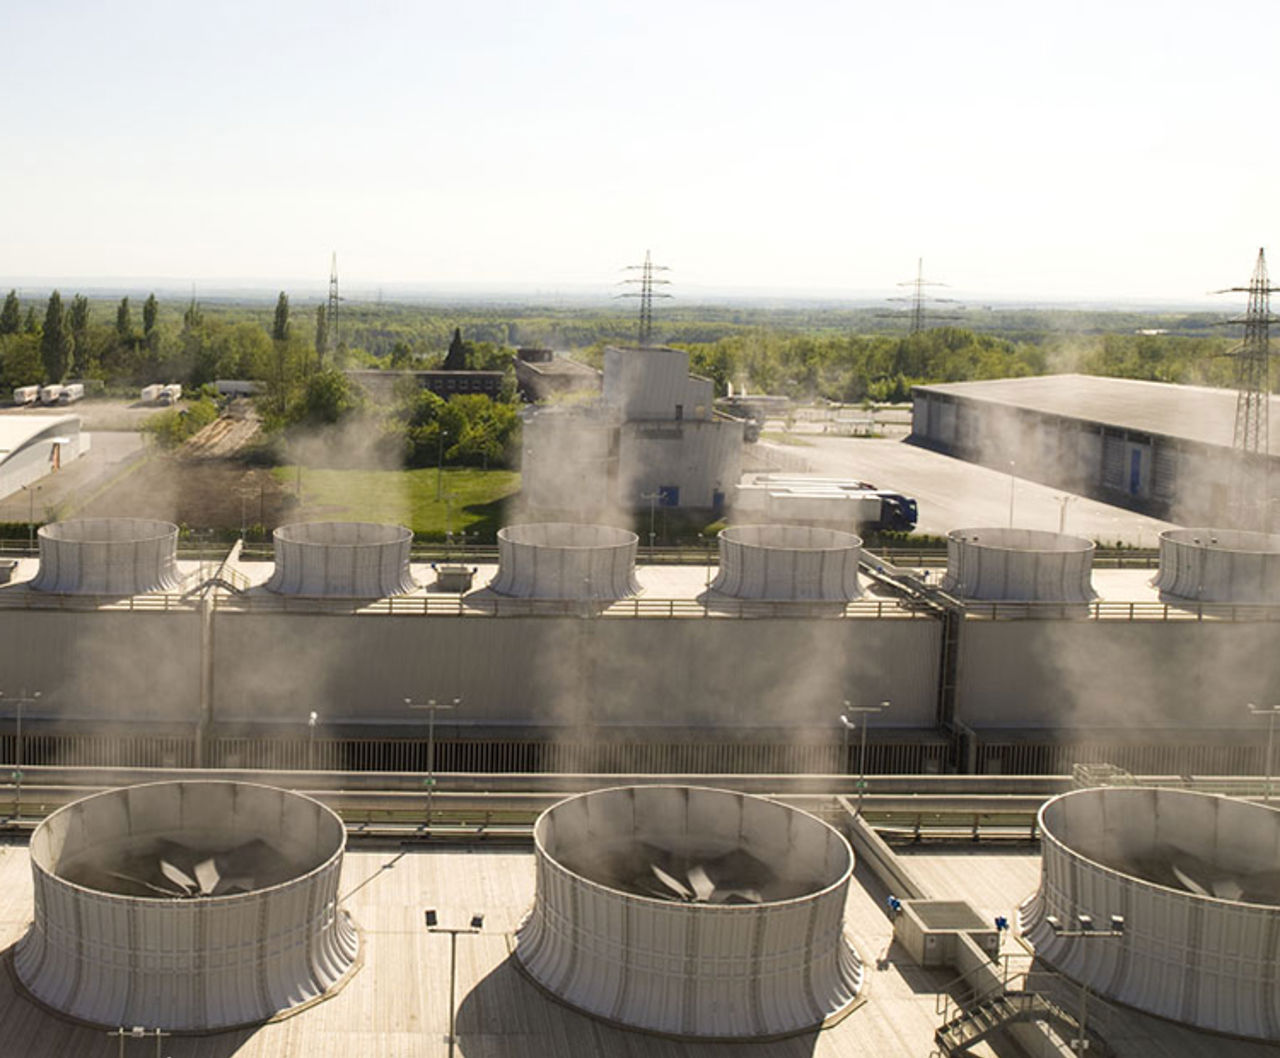 Roof of a thermal generation power plant